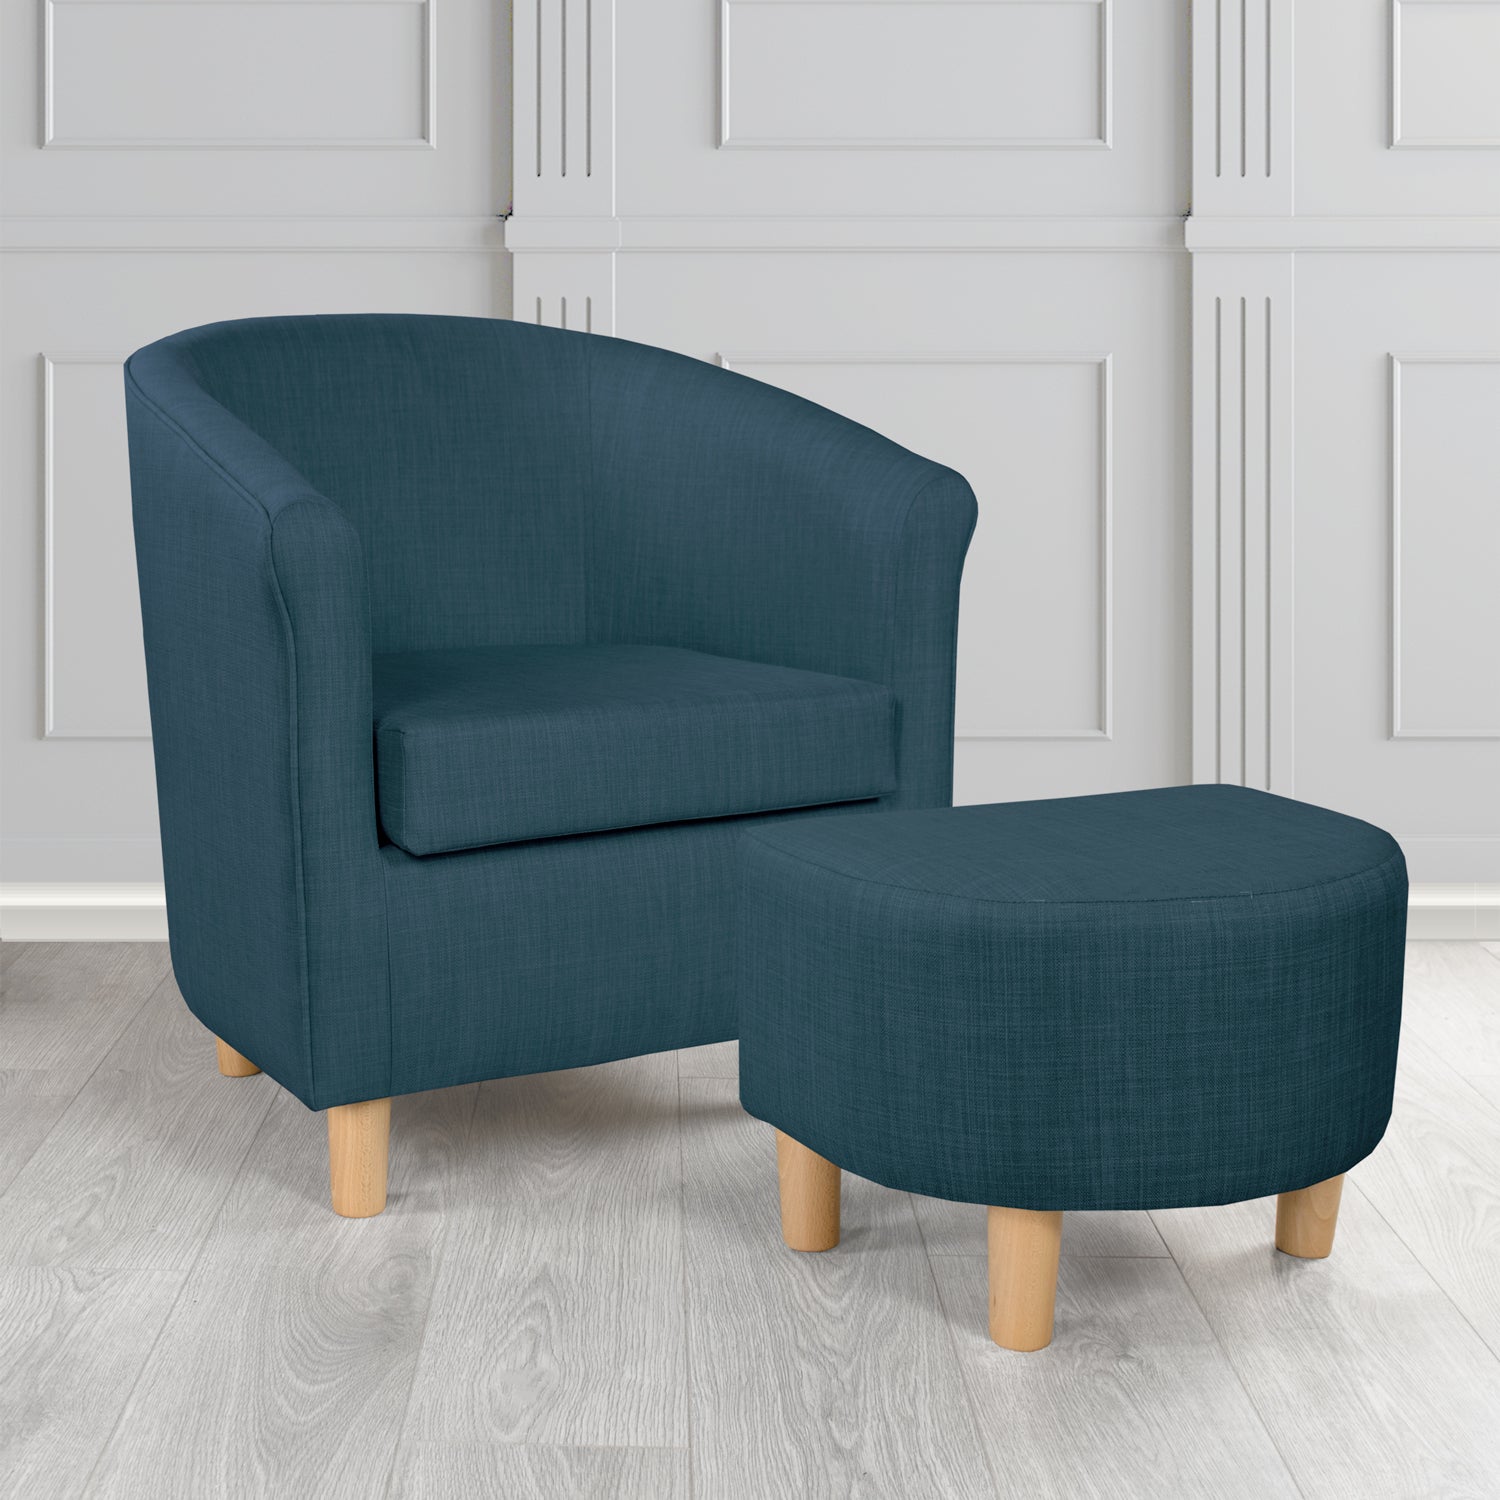 Tuscany Charles Midnight Linen Plain Fabric Tub Chair with Dee Footstool Set - The Tub Chair Shop